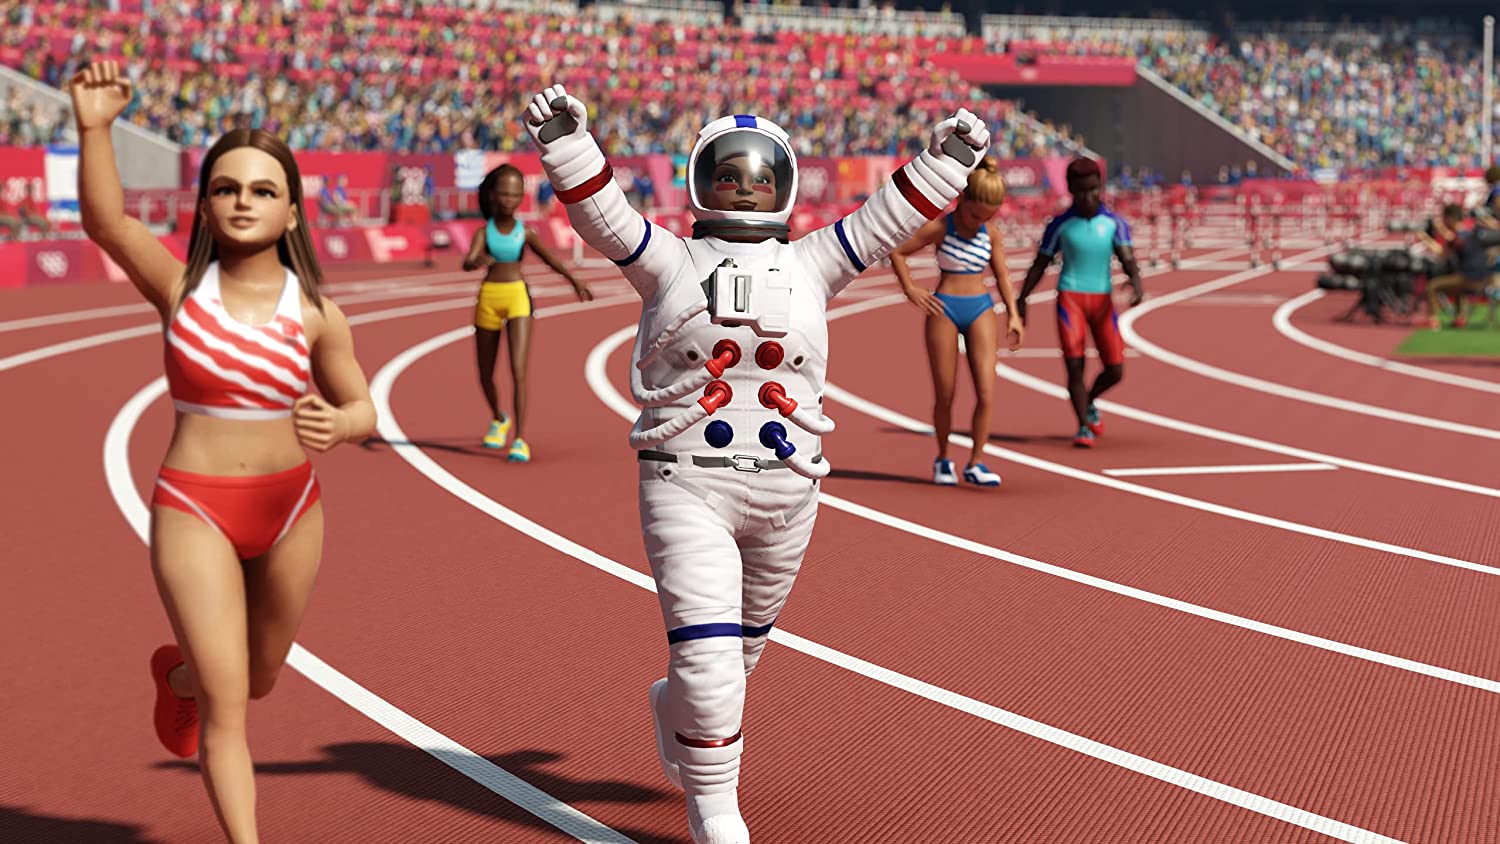 Tokyo 2020 Olympic Games For PlayStation 4 “Region 2” - Level Up